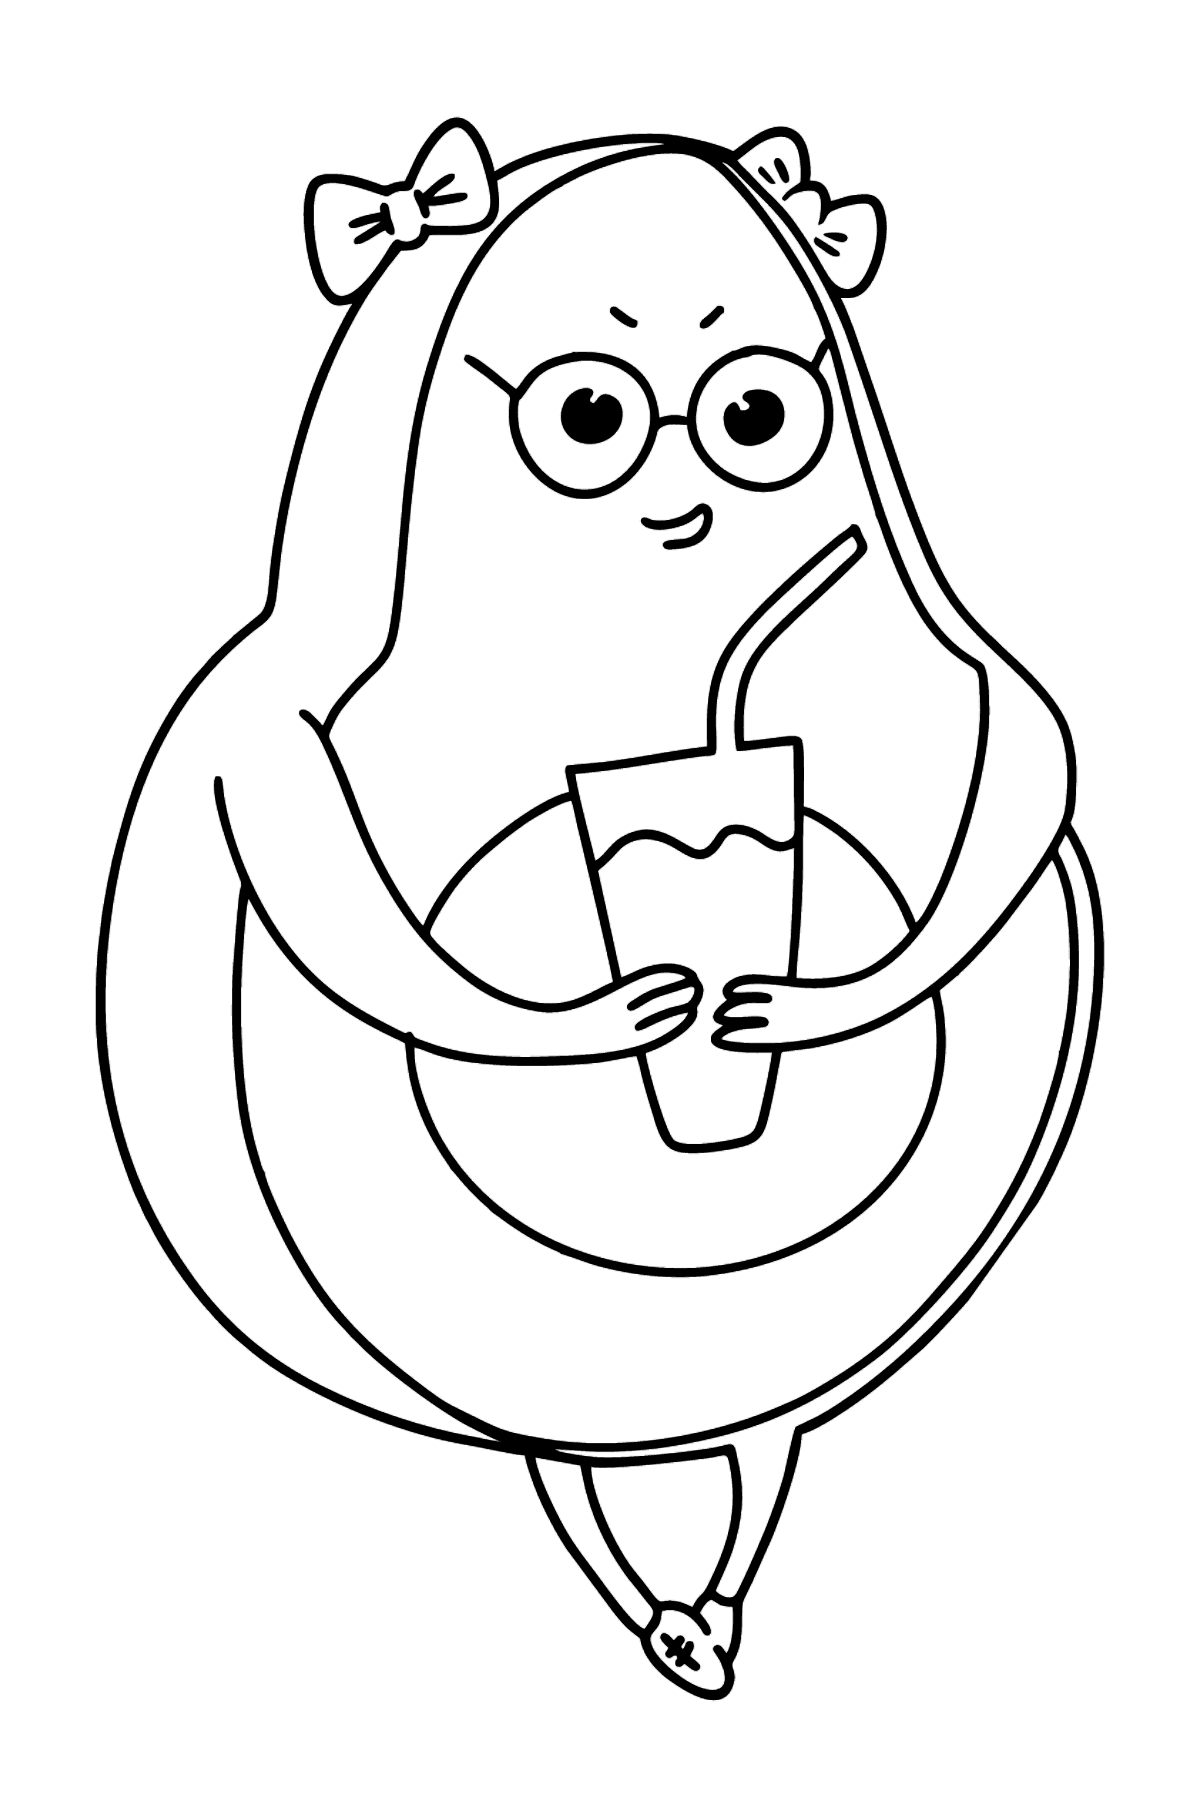 Avocado with Delicious Drink coloring page - Coloring Pages for Kids